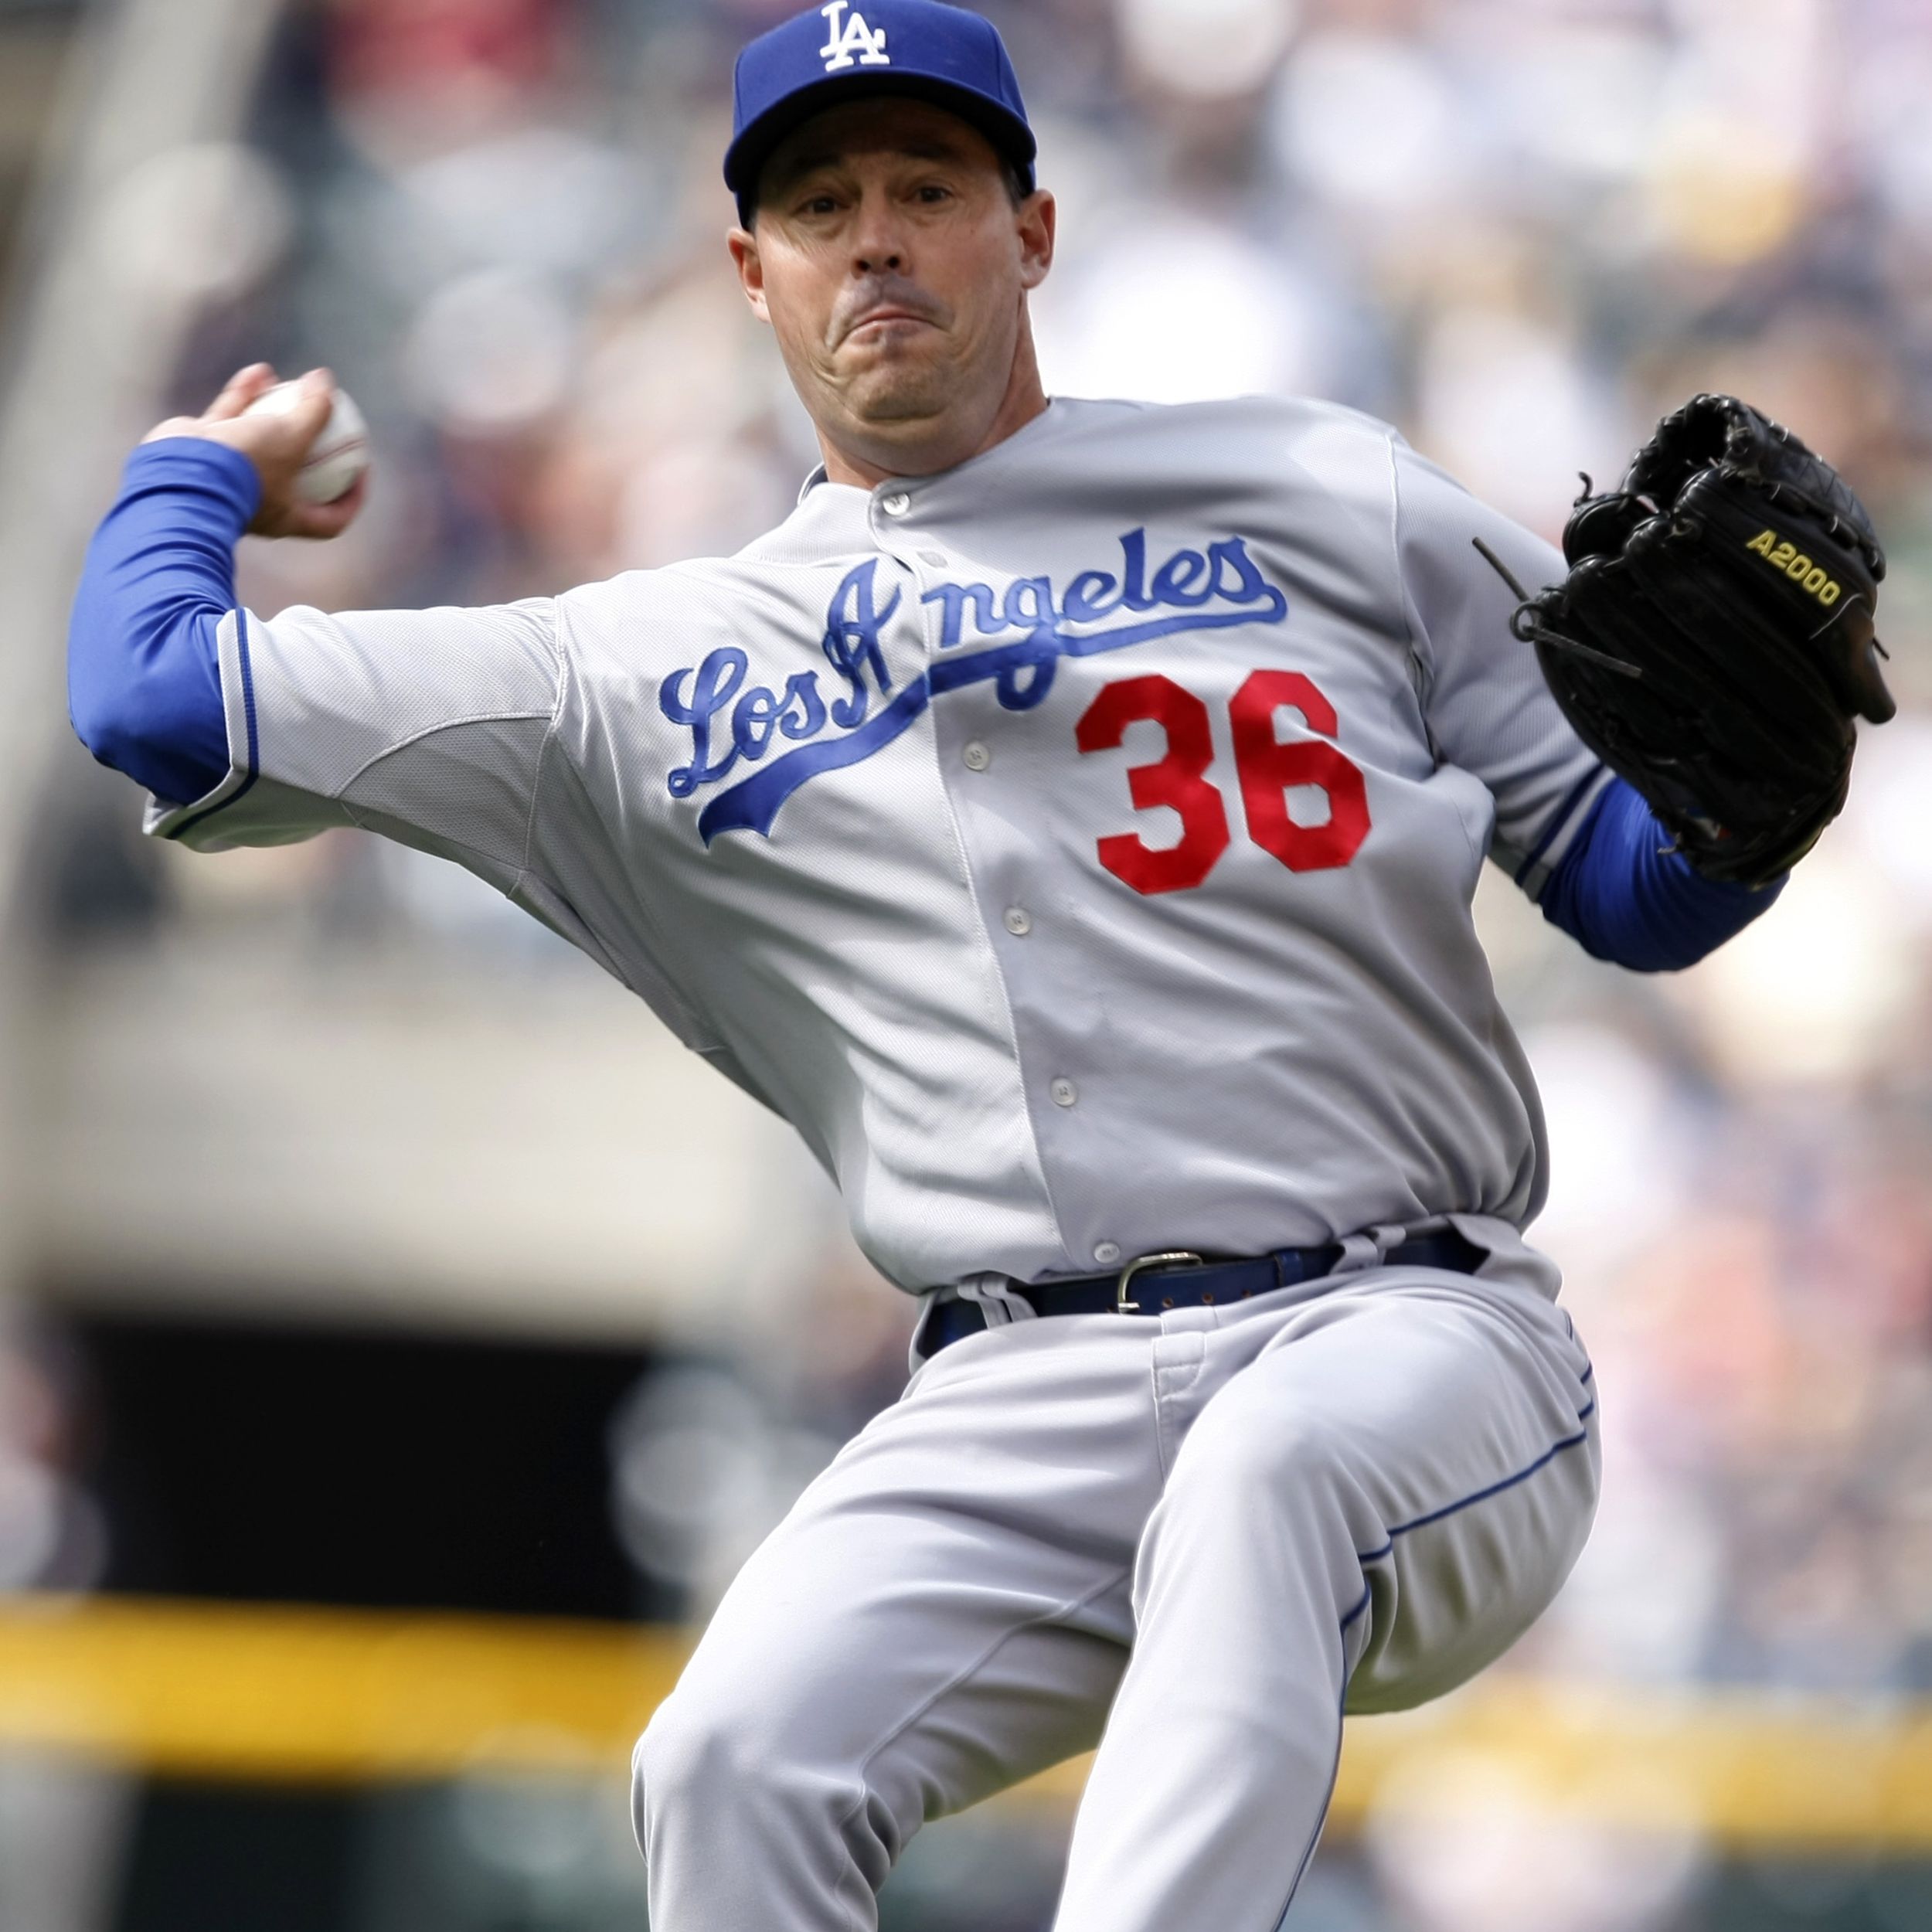 Greg Maddux 'looking forward' to A's move to Las Vegas